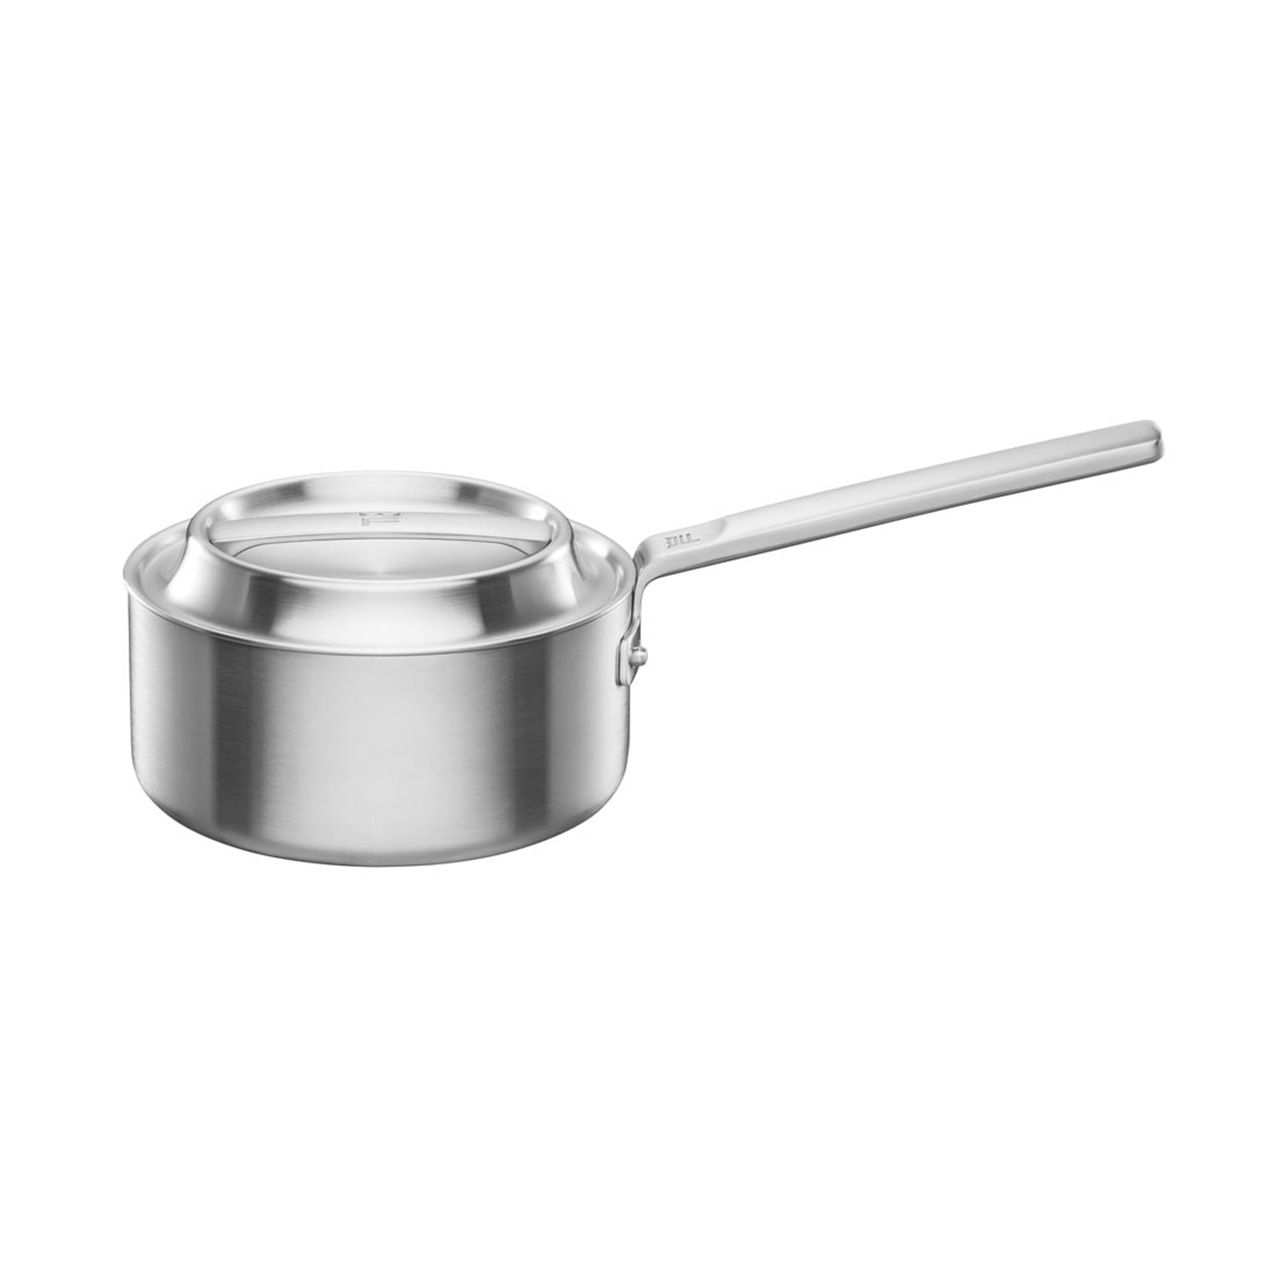 Norden Saucepan Uncoated Stainless Steel, 1,8 L